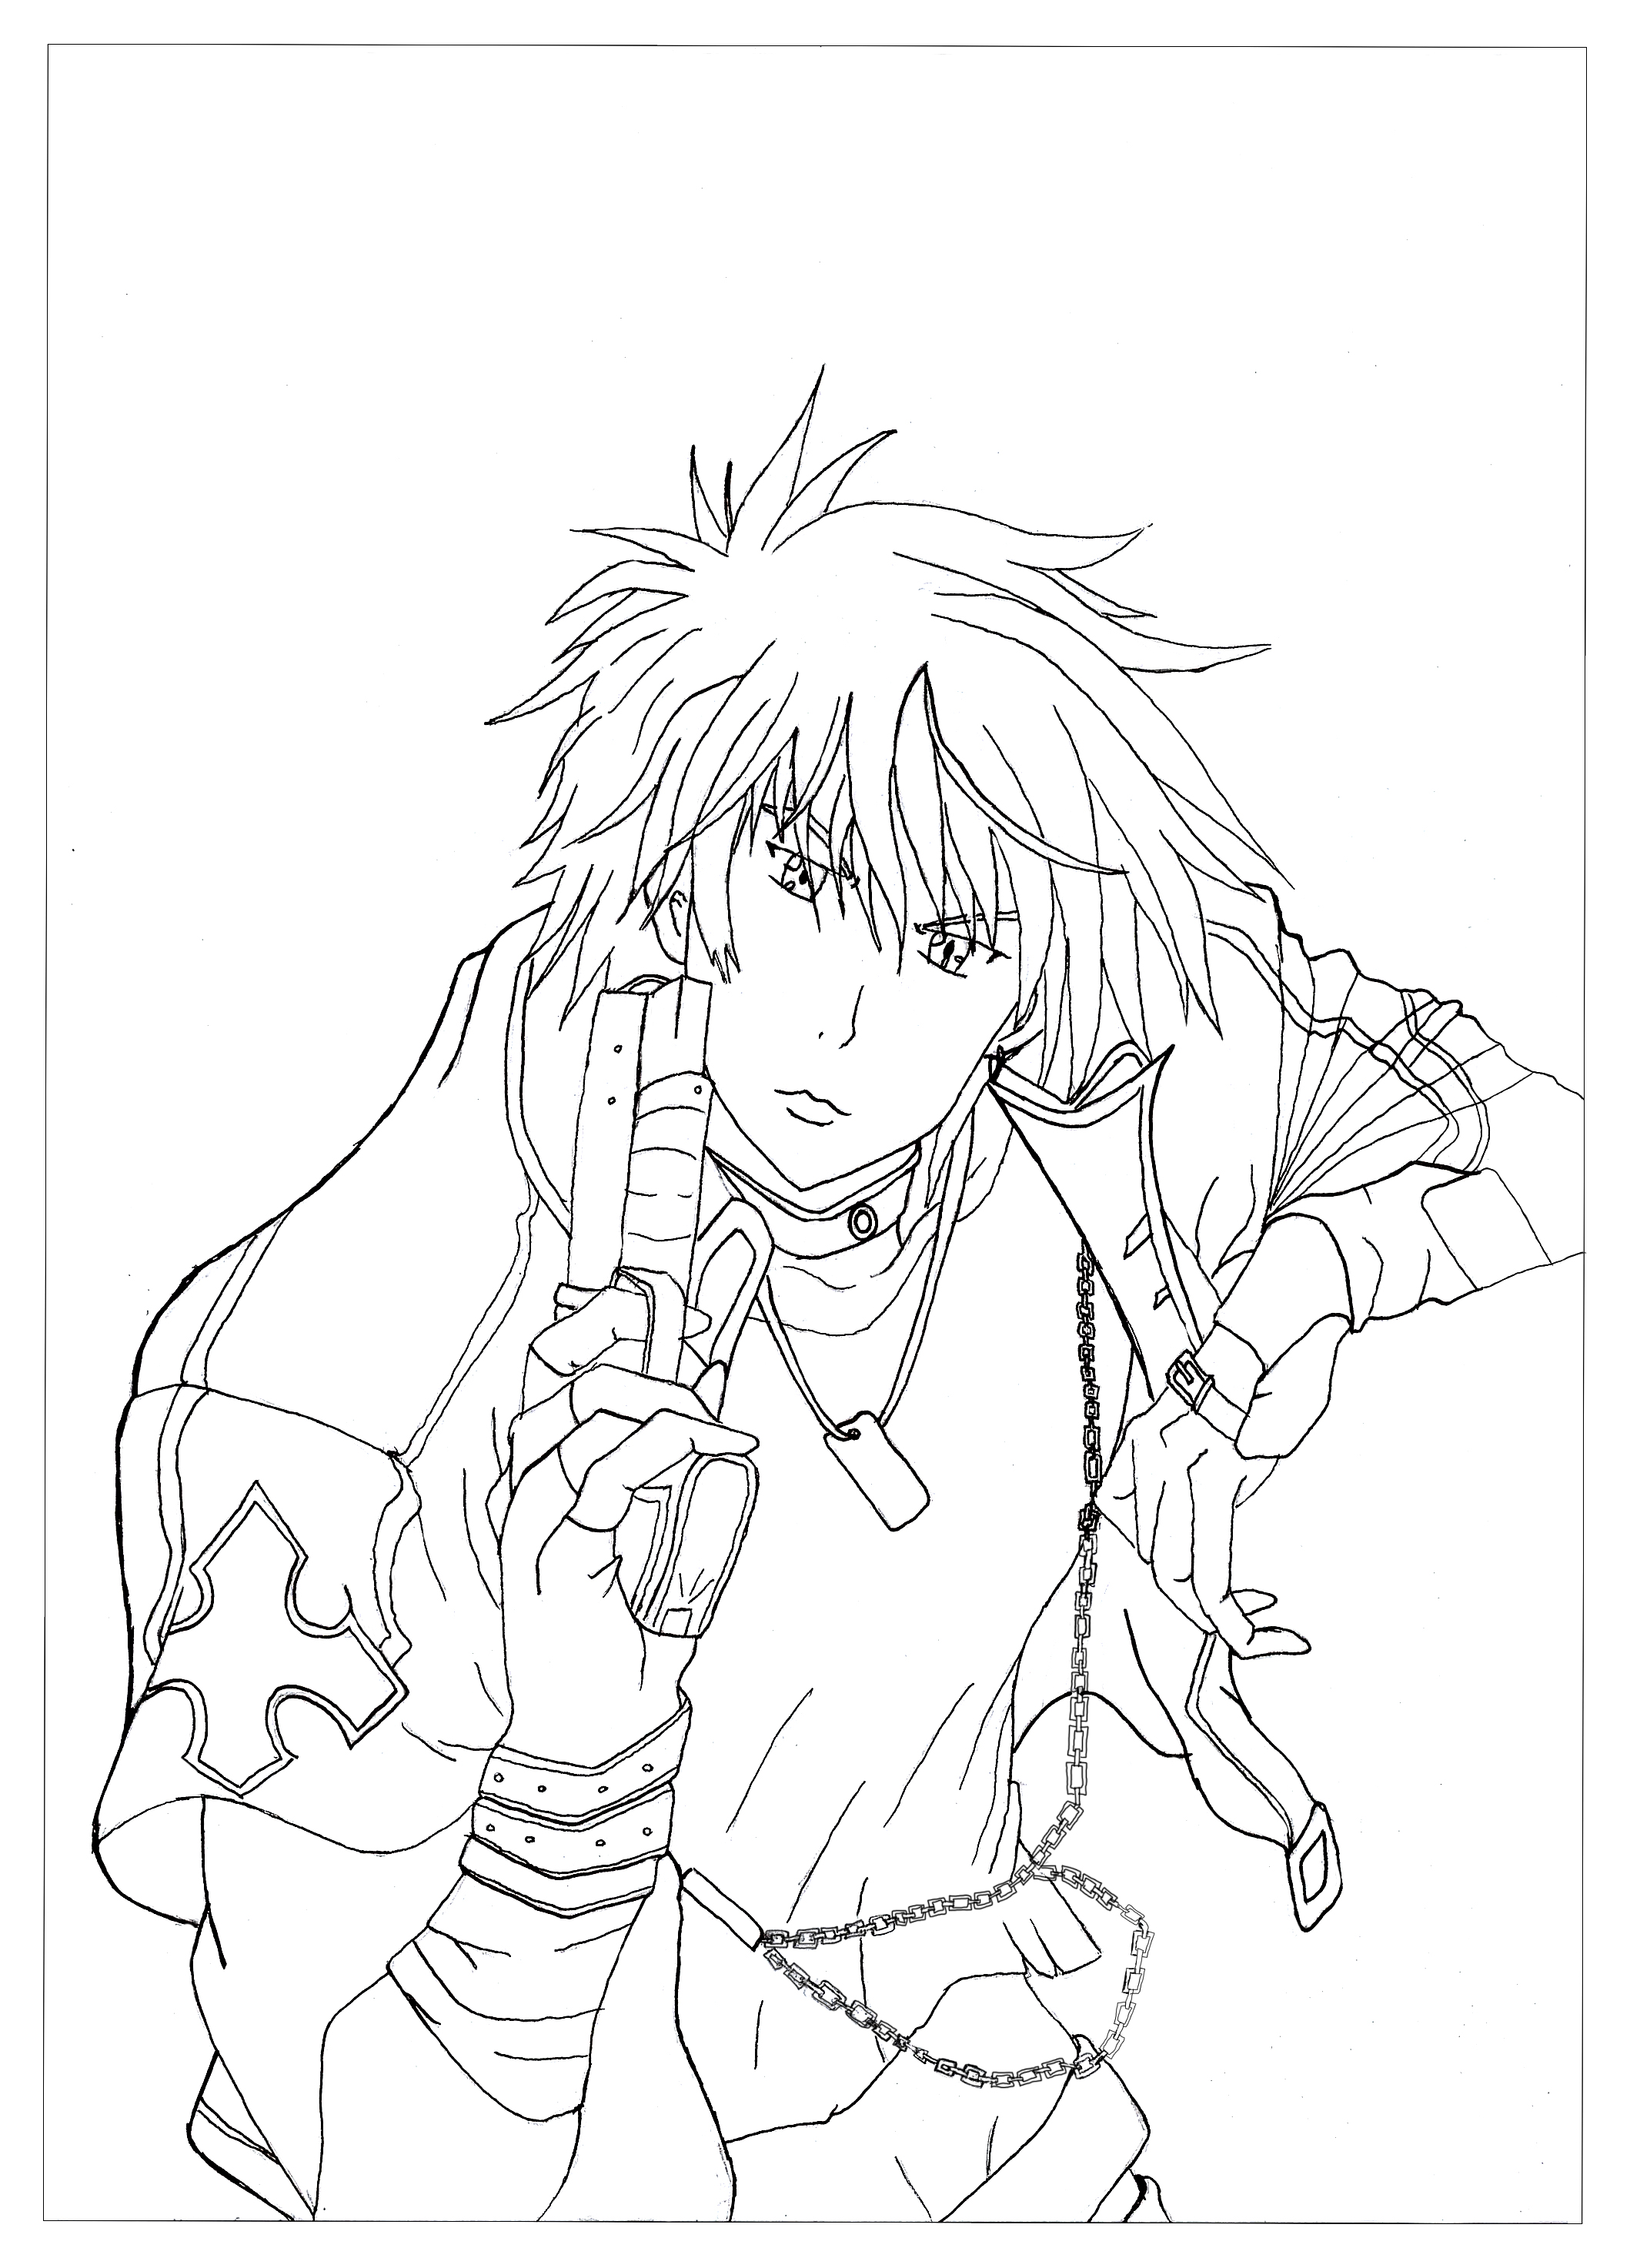 Here is a coloring page from Rayne. He's the character of the manga Neo Angelique Abyss. His role is to purify the evil spirit with his weapon, Artist : Krissy